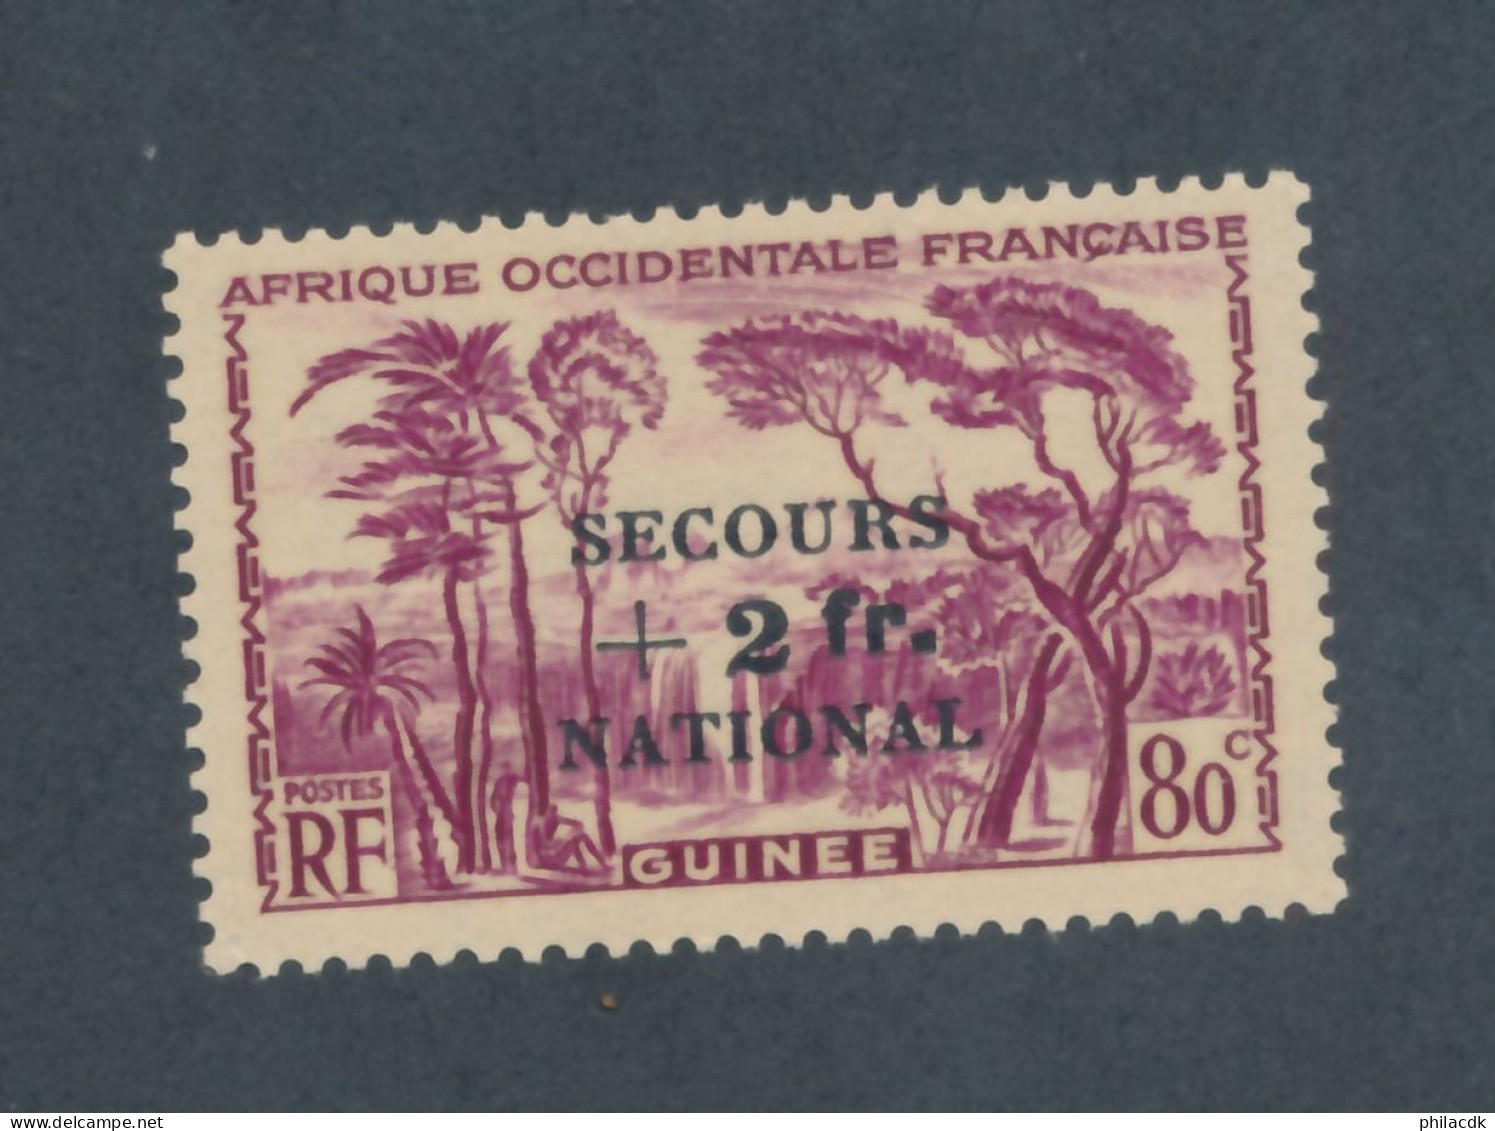 GUINEE - N° 173 NEUF* AVEC CHARNIERE - 1941 - Unused Stamps